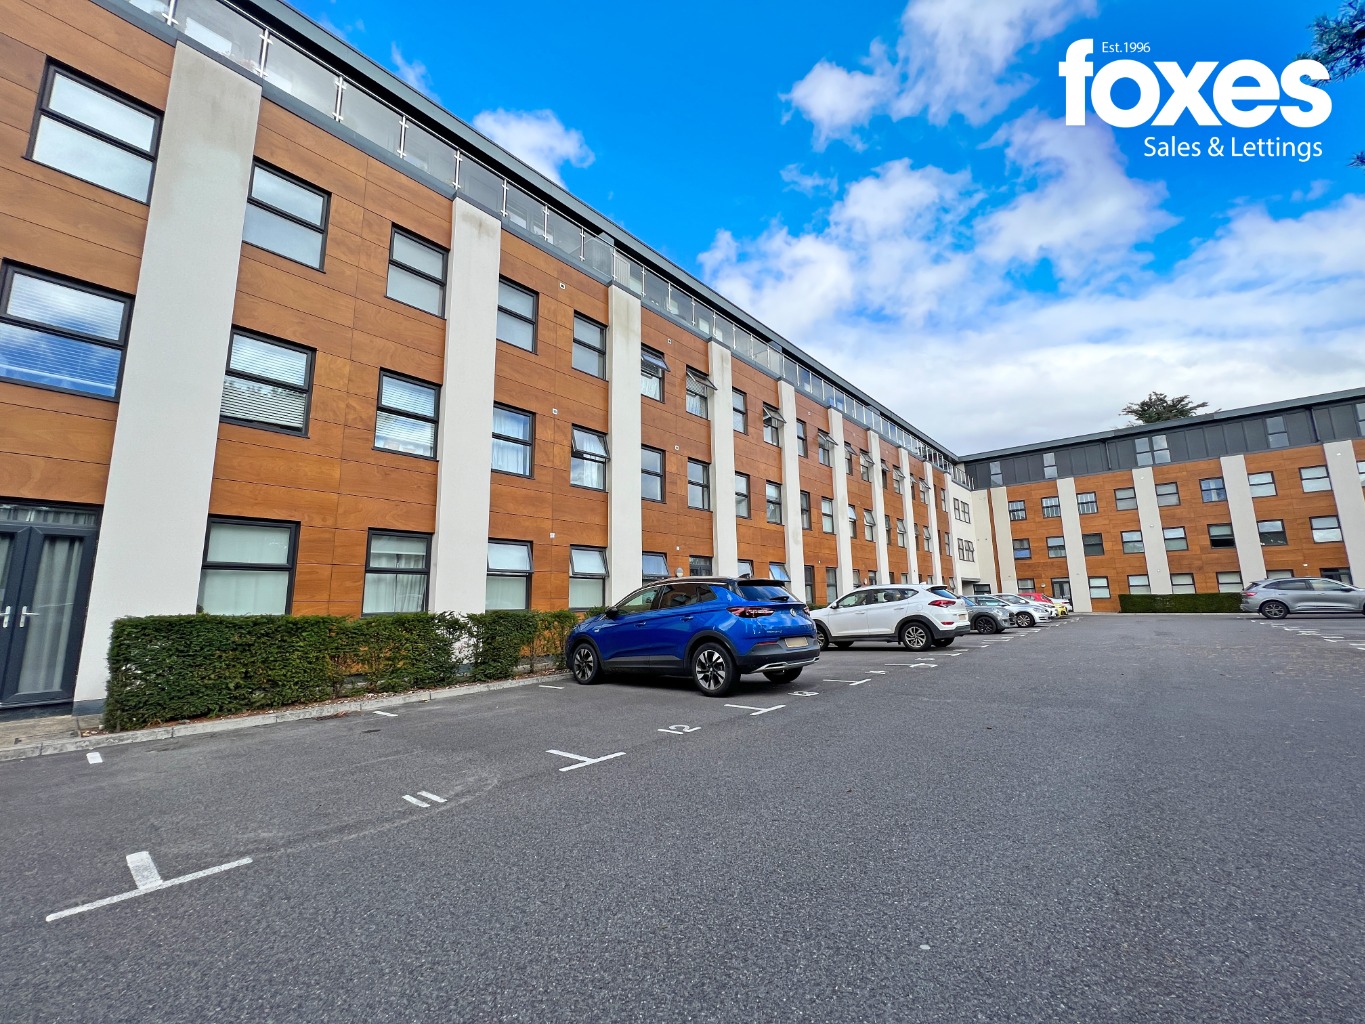 2 bed flat for sale in Victoria House, Ferndown - Property Image 1